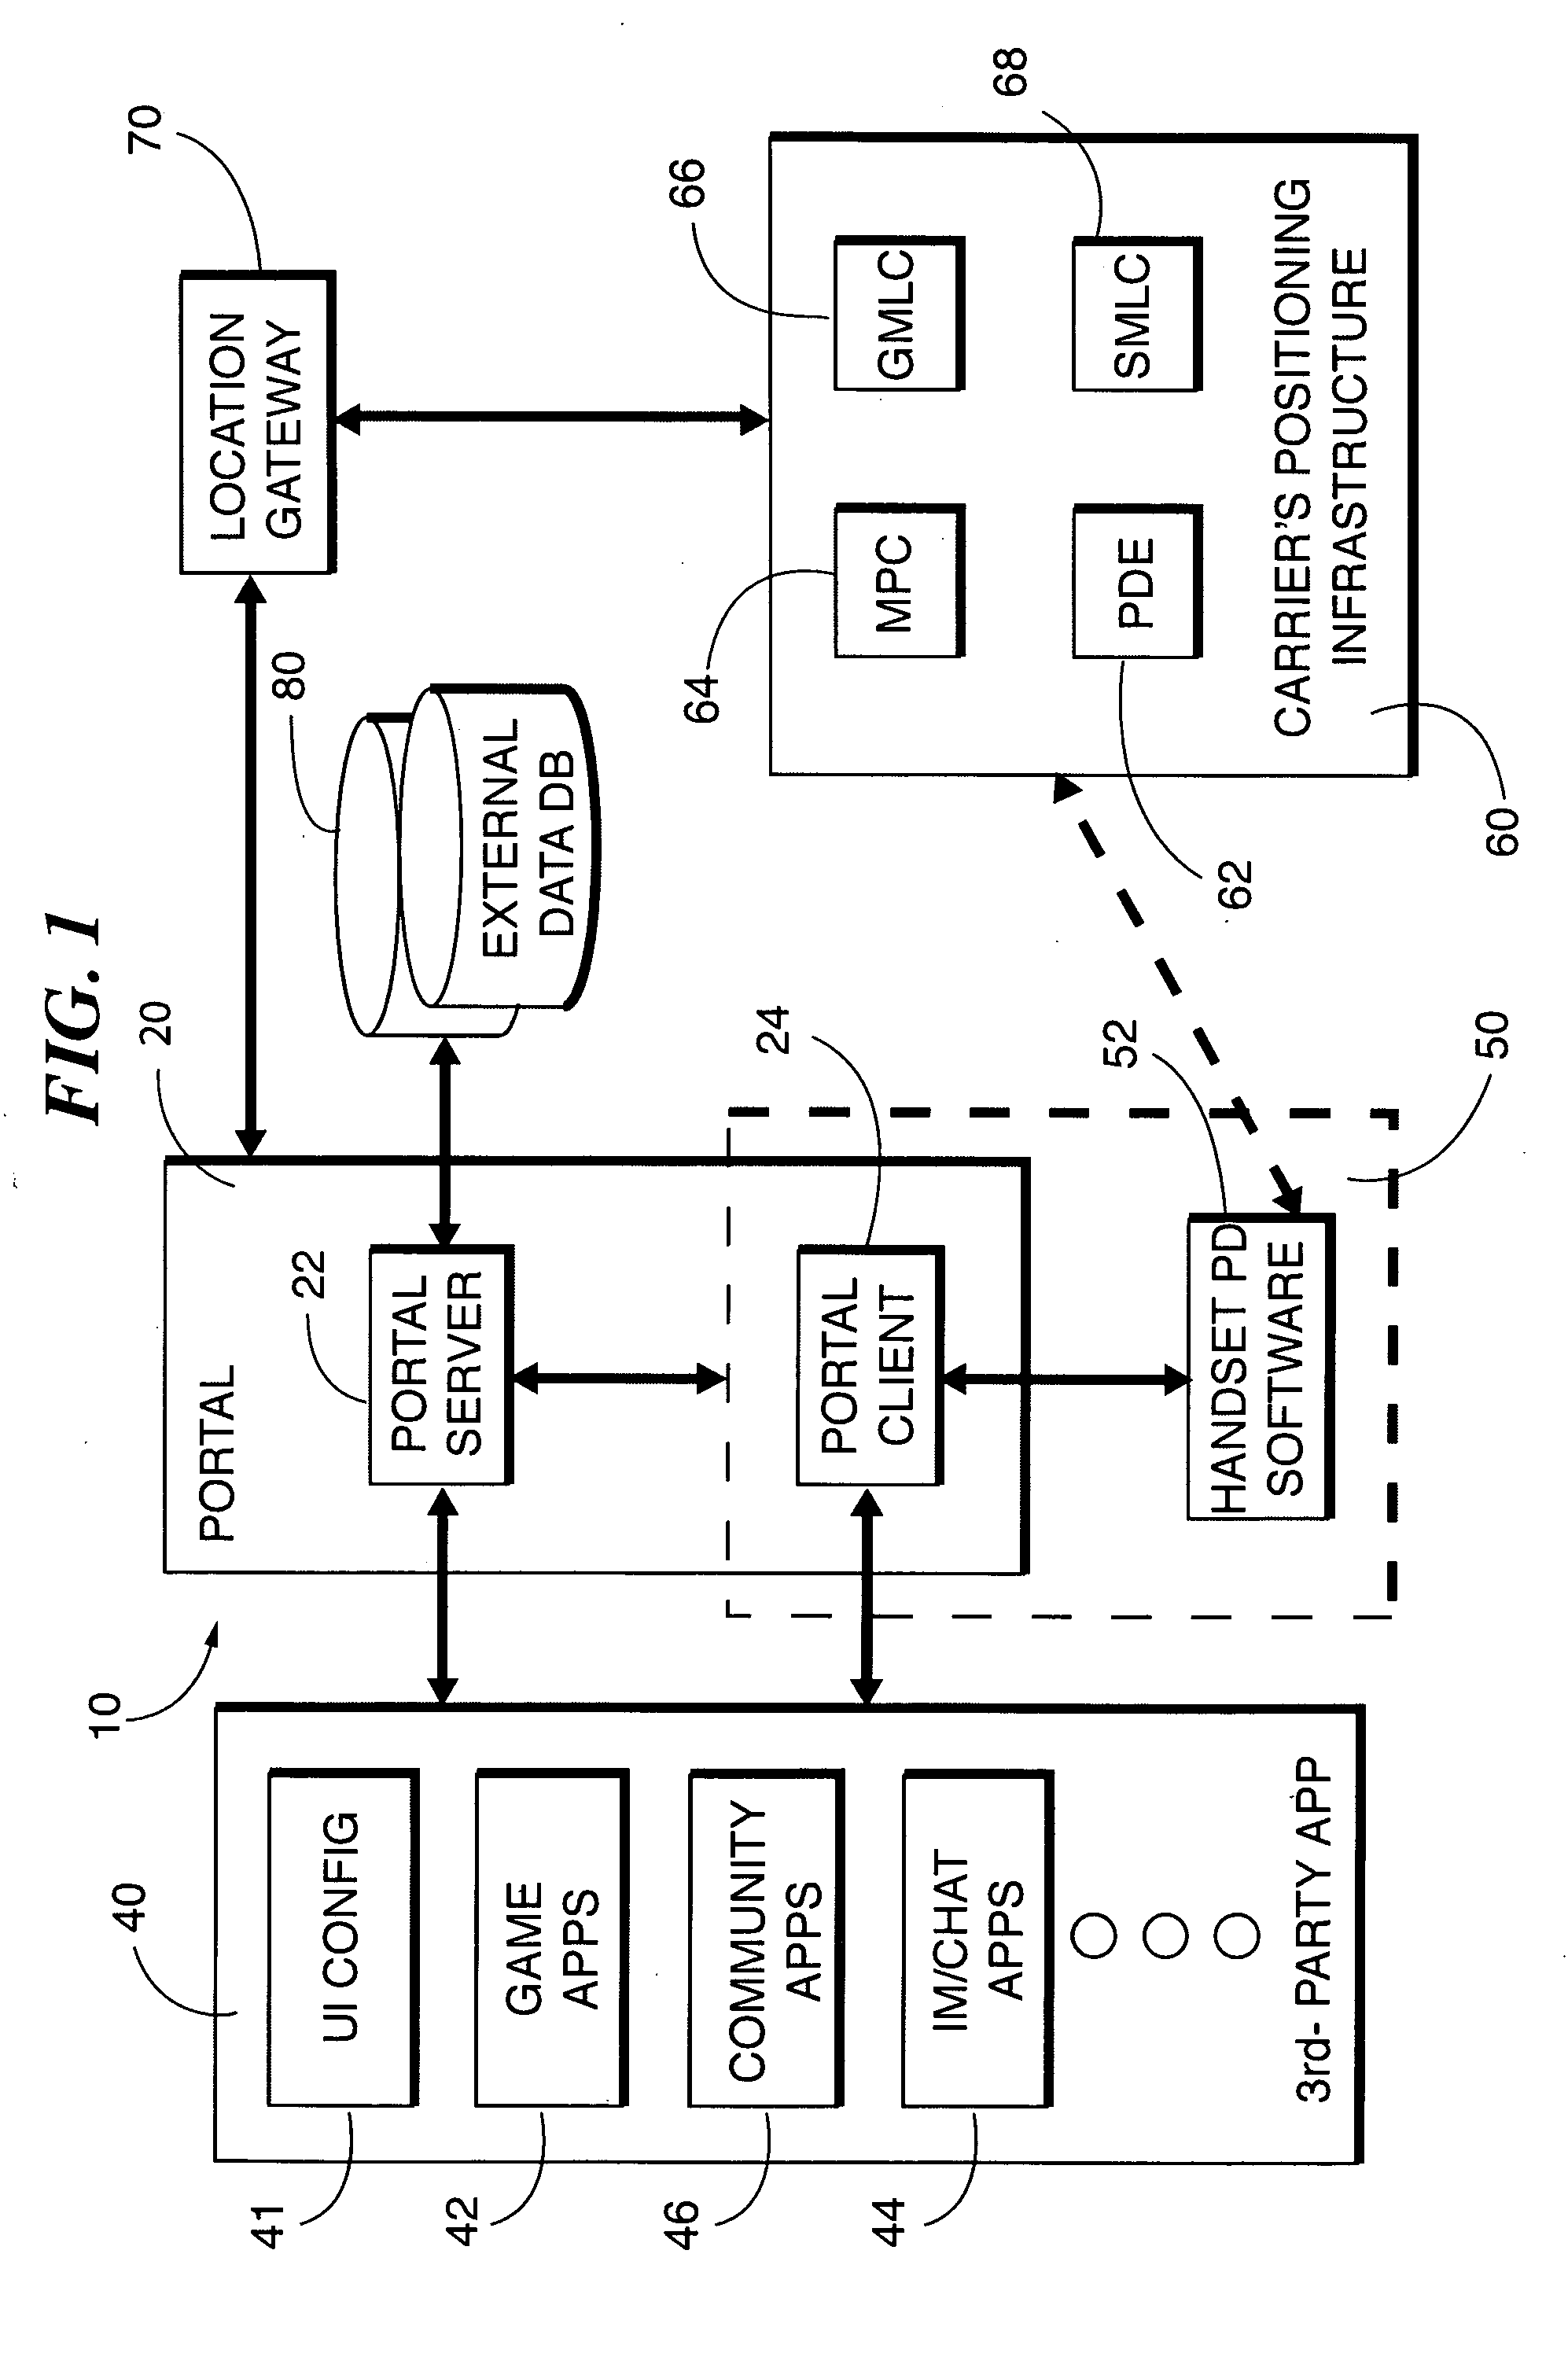 Method and apparatus for developing location-based applications utilizing a location-based portal